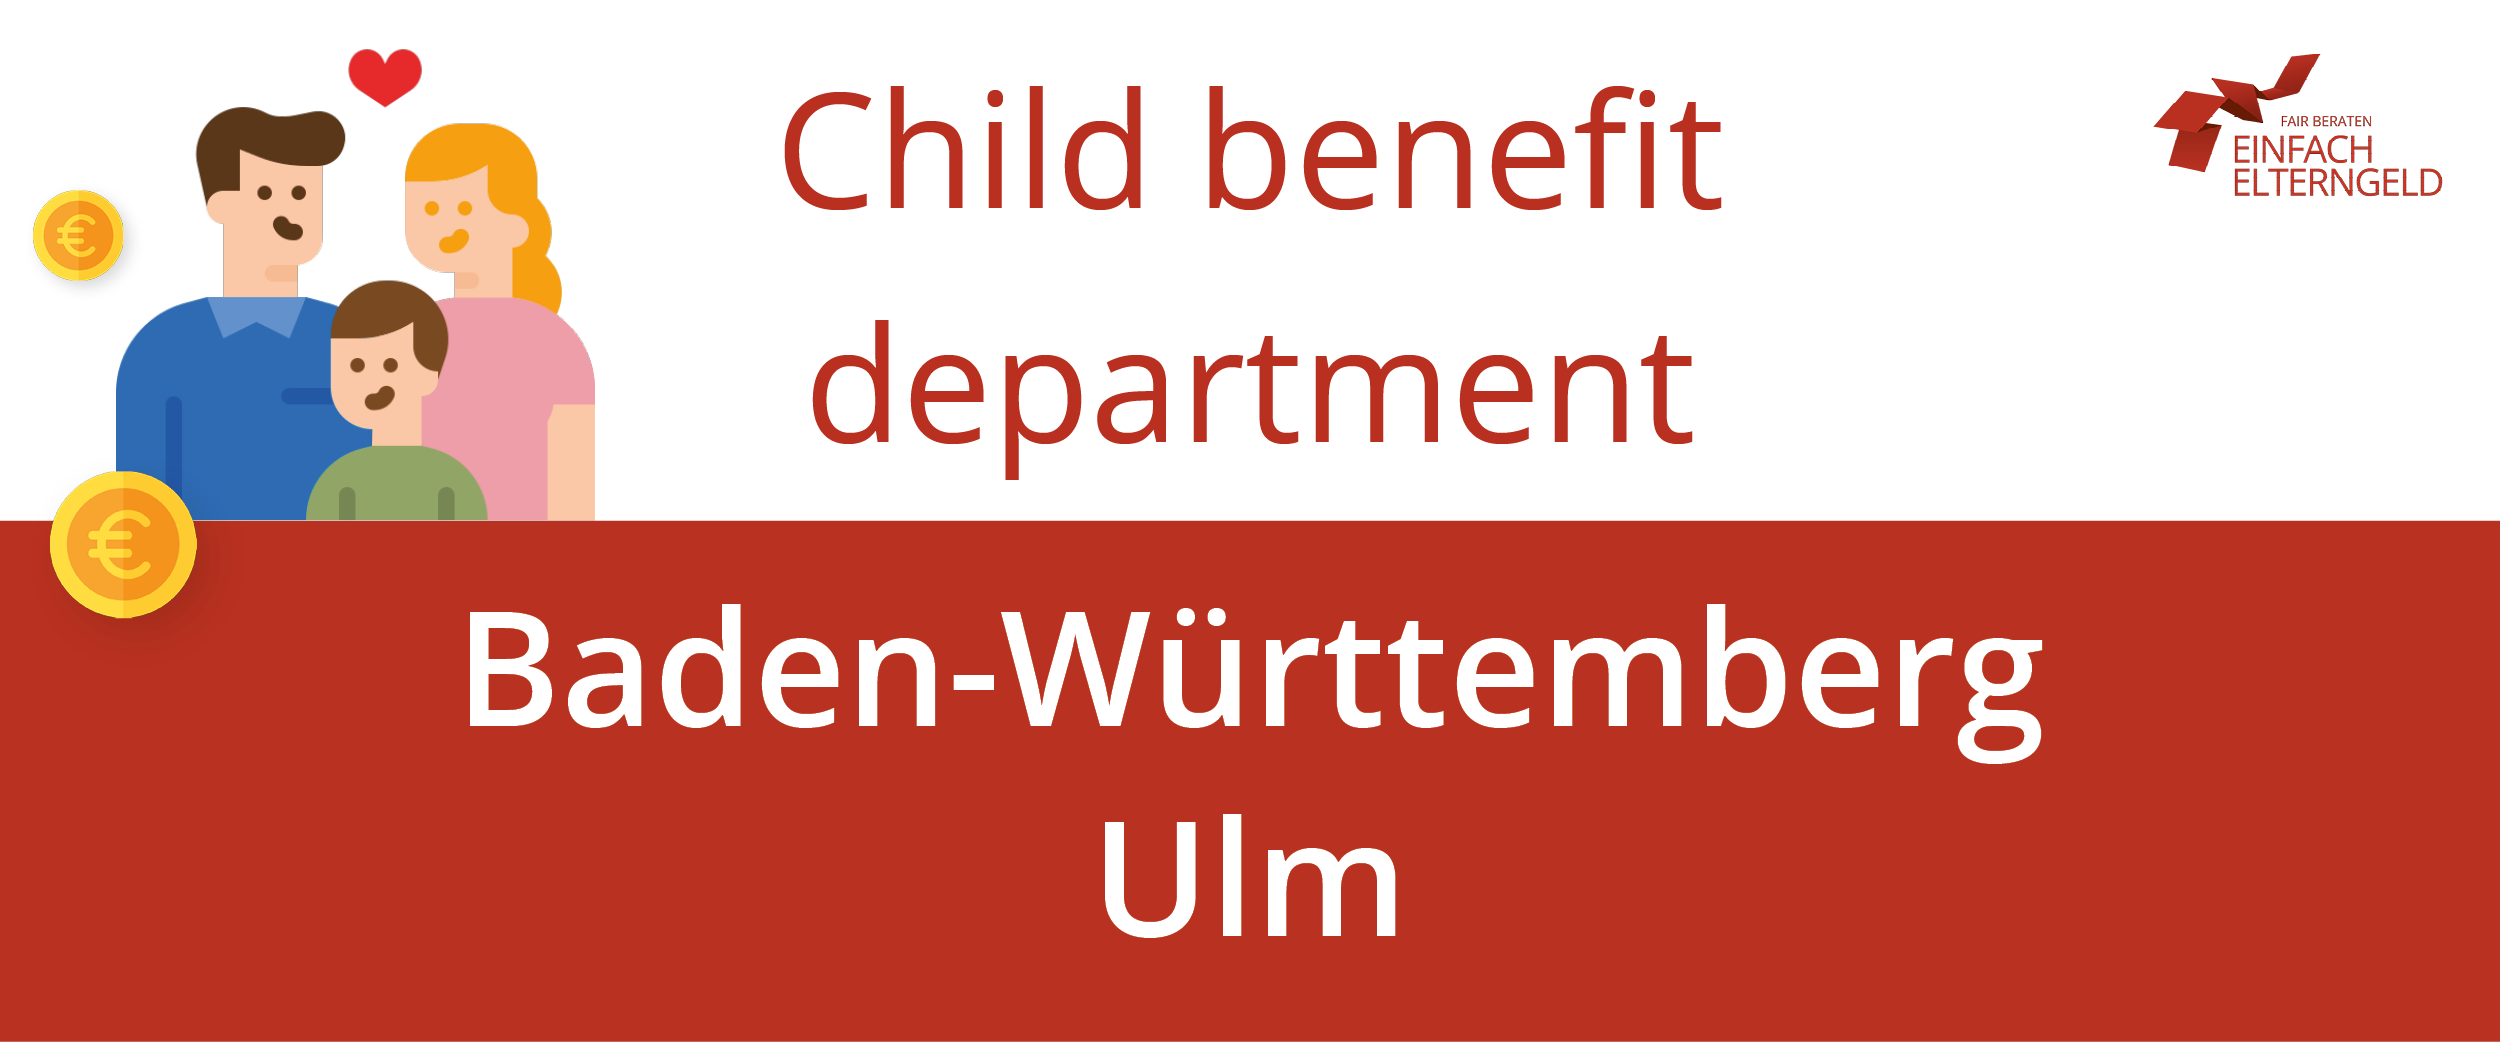 We introduce to you the Child benefit department Baden-Württemberg Ulm.